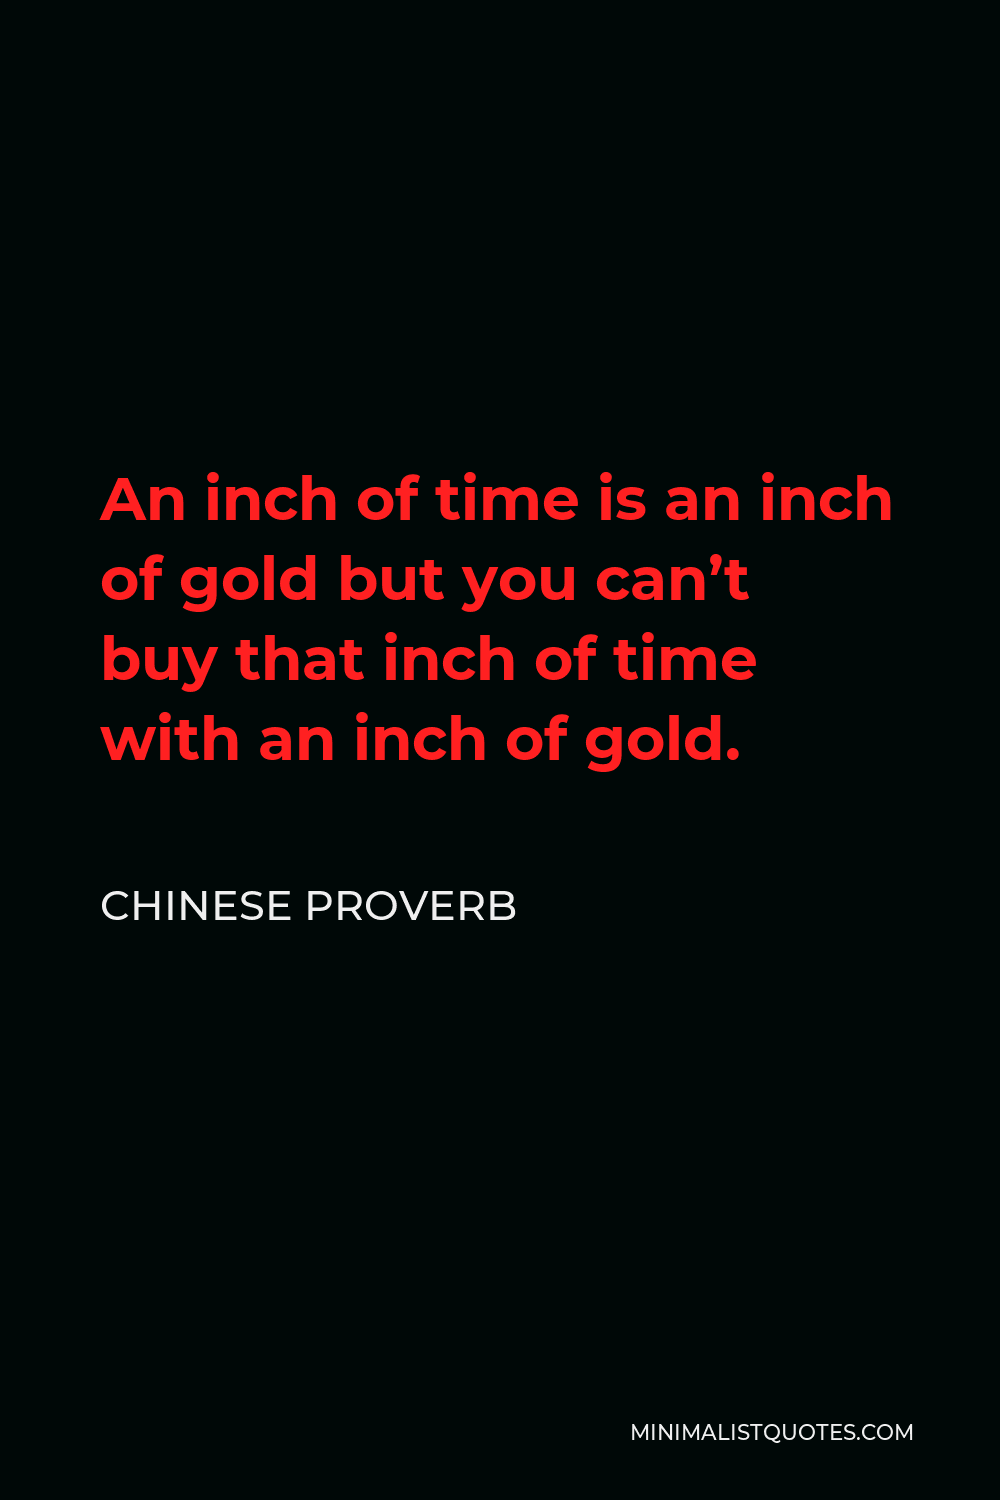 Chinese Proverb Quote - An inch of time is an inch of gold but you can’t buy that inch of time with an inch of gold.